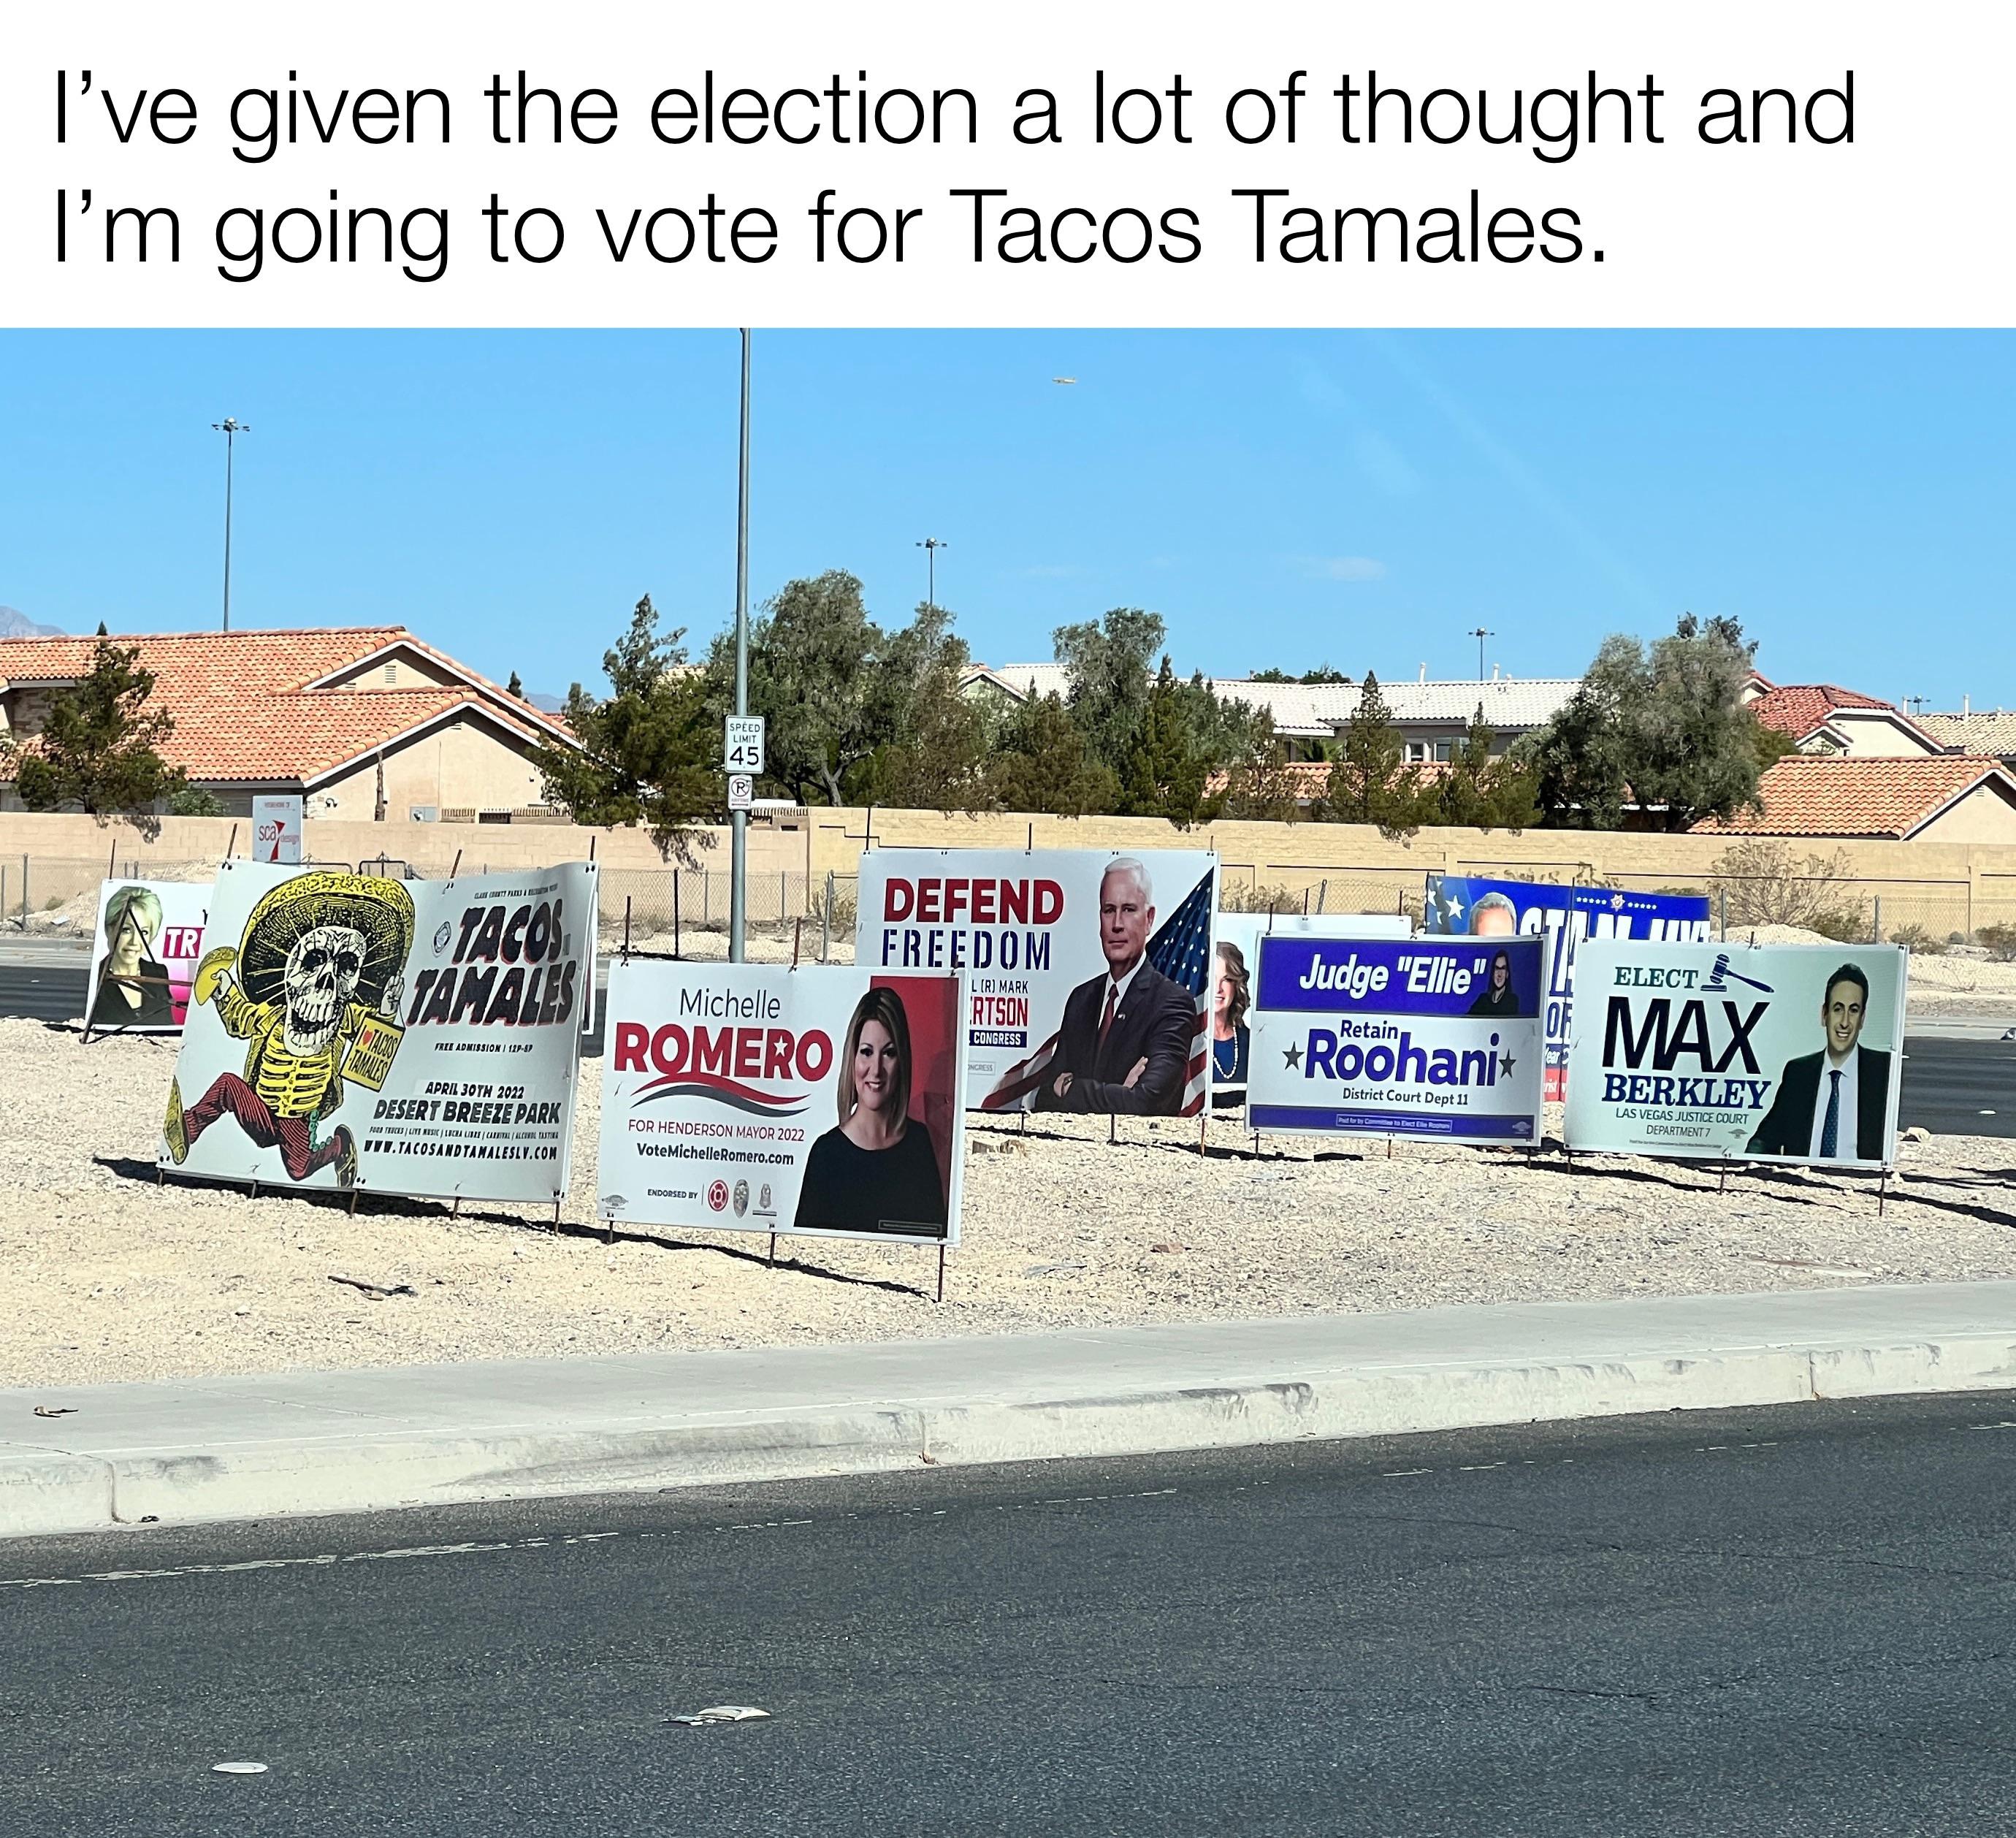 dank memes - vehicle - I've given the election a lot of thought and I'm going to vote for Tacos Tamales. fo Defend Freedom Pts Tacos Caratu Romero Electes La Michelle Judge "Ellie Roohanit Max Berkley Mvh Art Areena Arrera